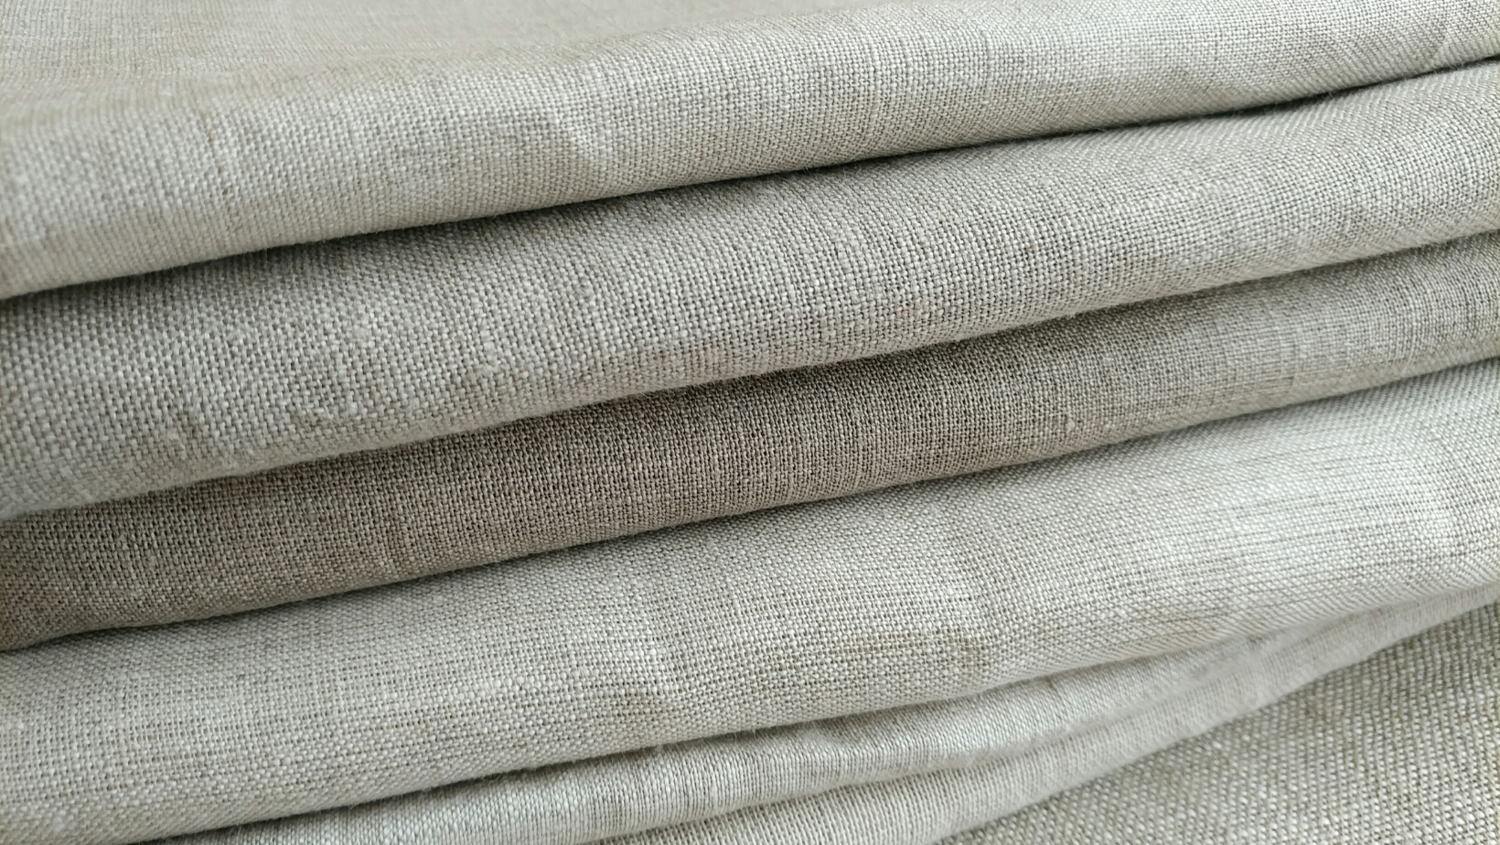 What is Linen Clothes? 5 Amazing Features of Linen Fabric.